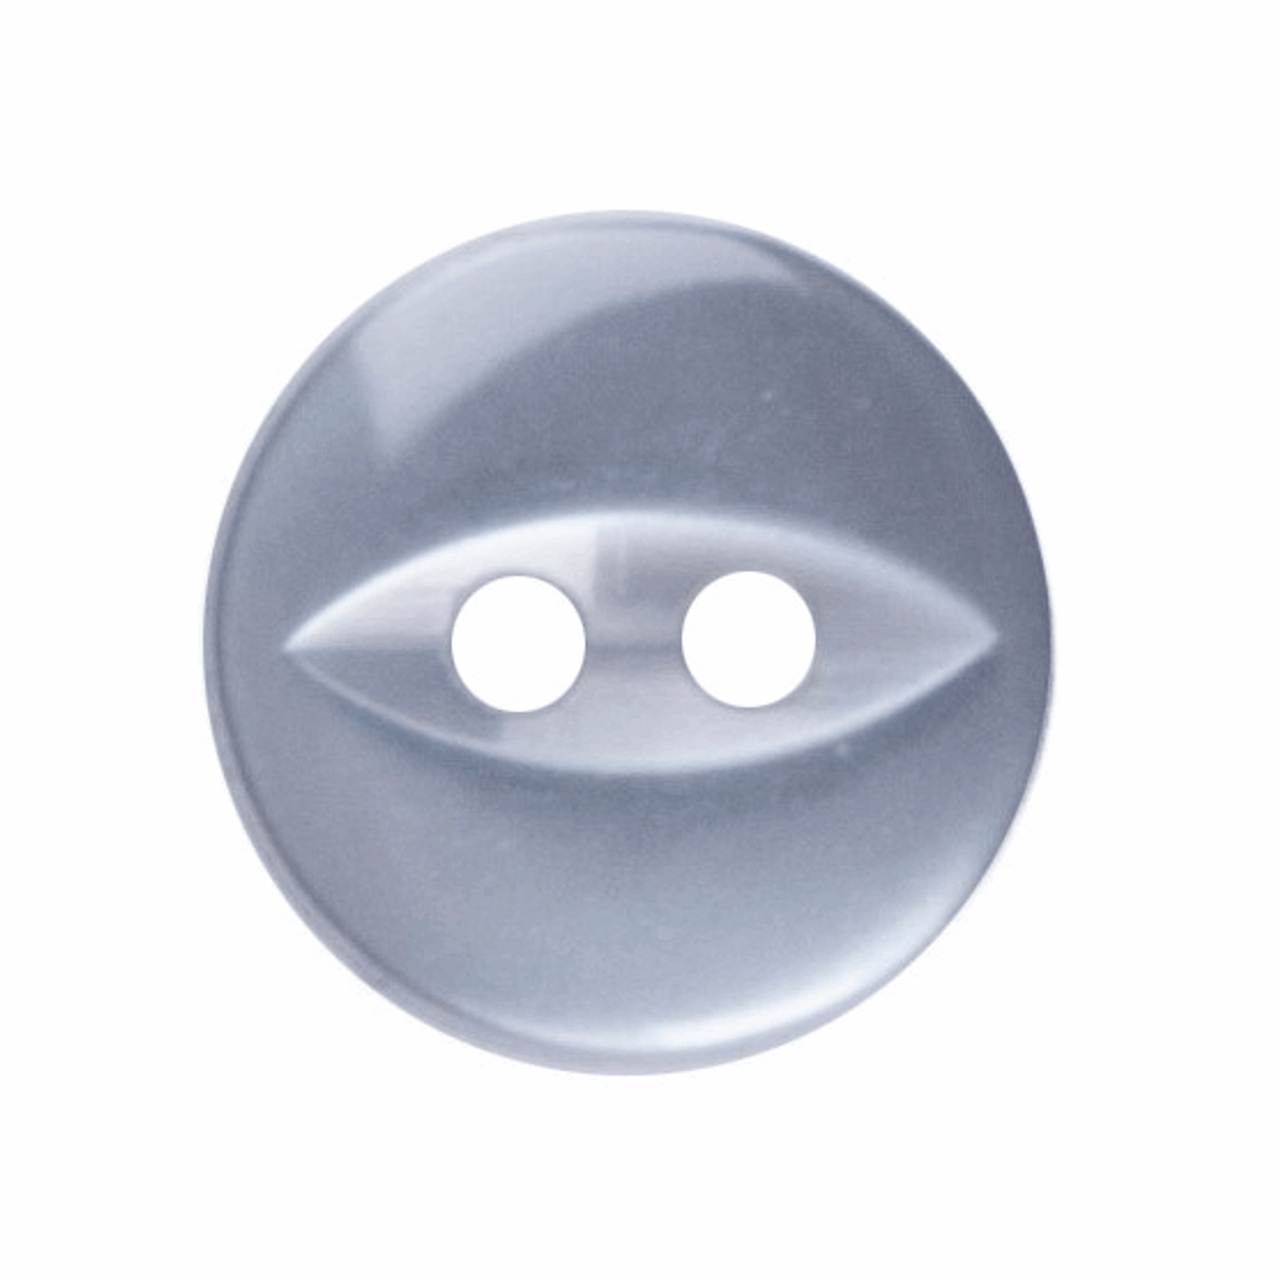 Grey Fish Eye Button - Available in 4 Sizes (Sold Individually)